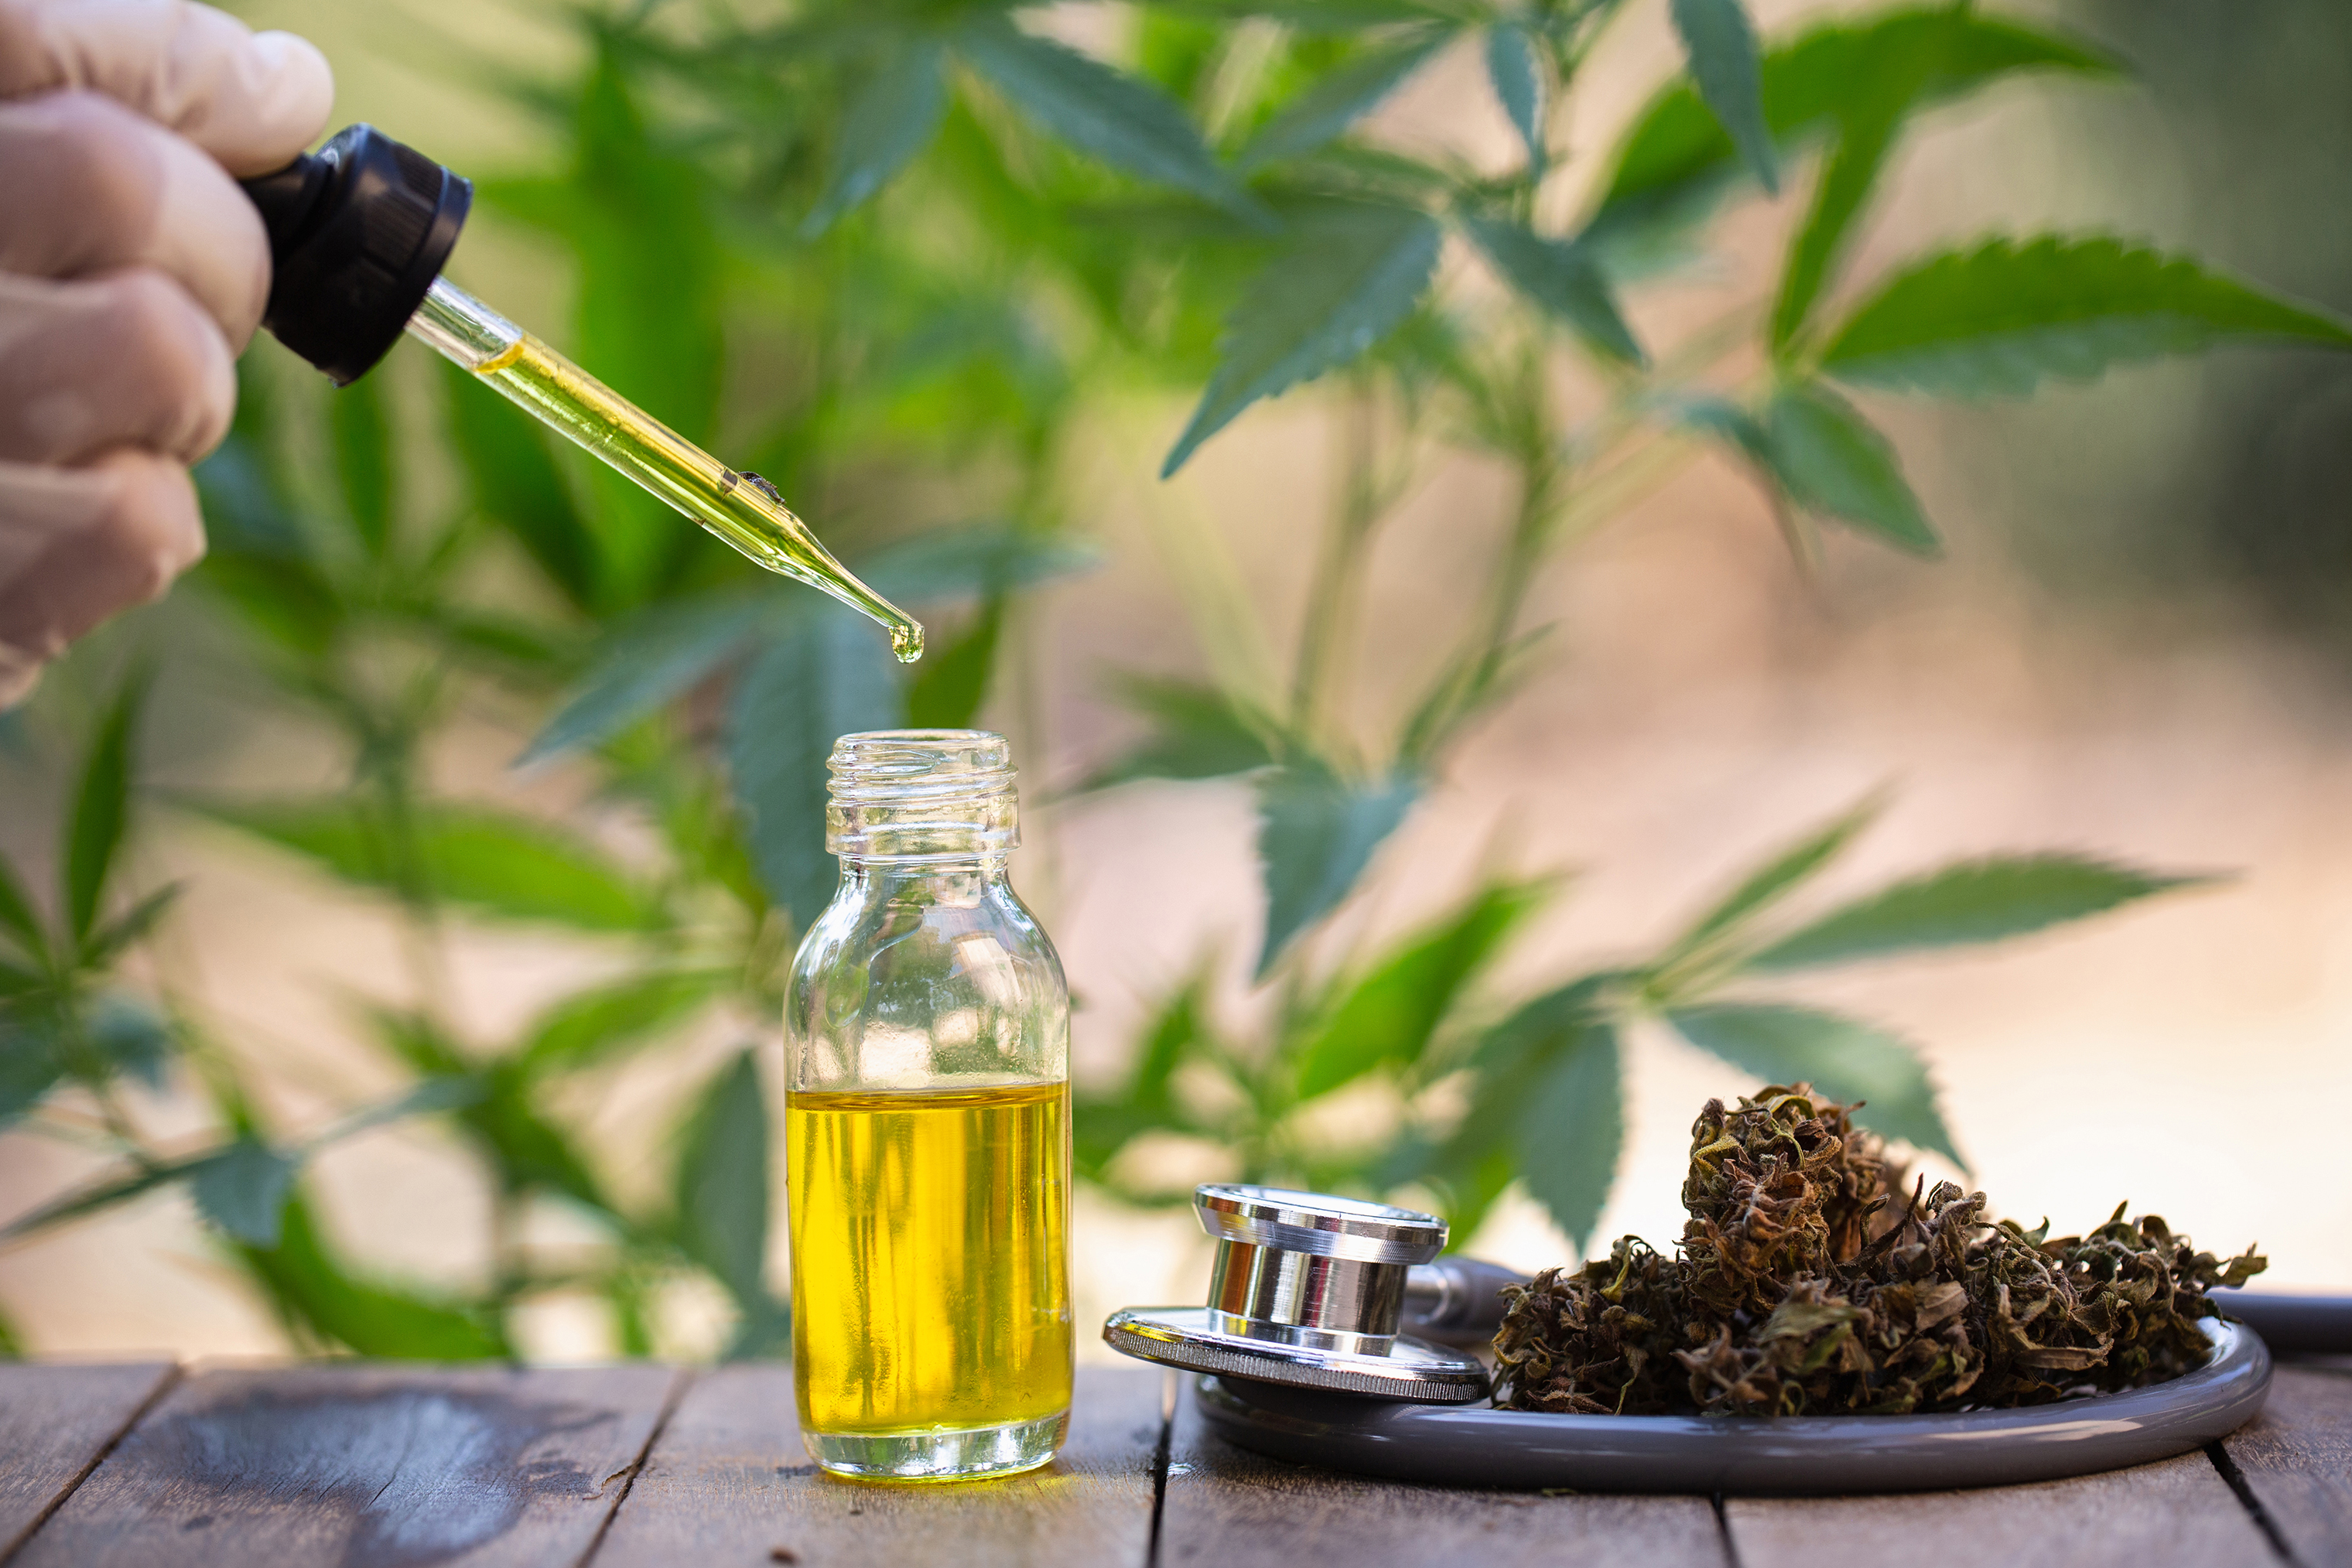 Is Cannabis Oil Actually Beneficial For Cancer Treatment?